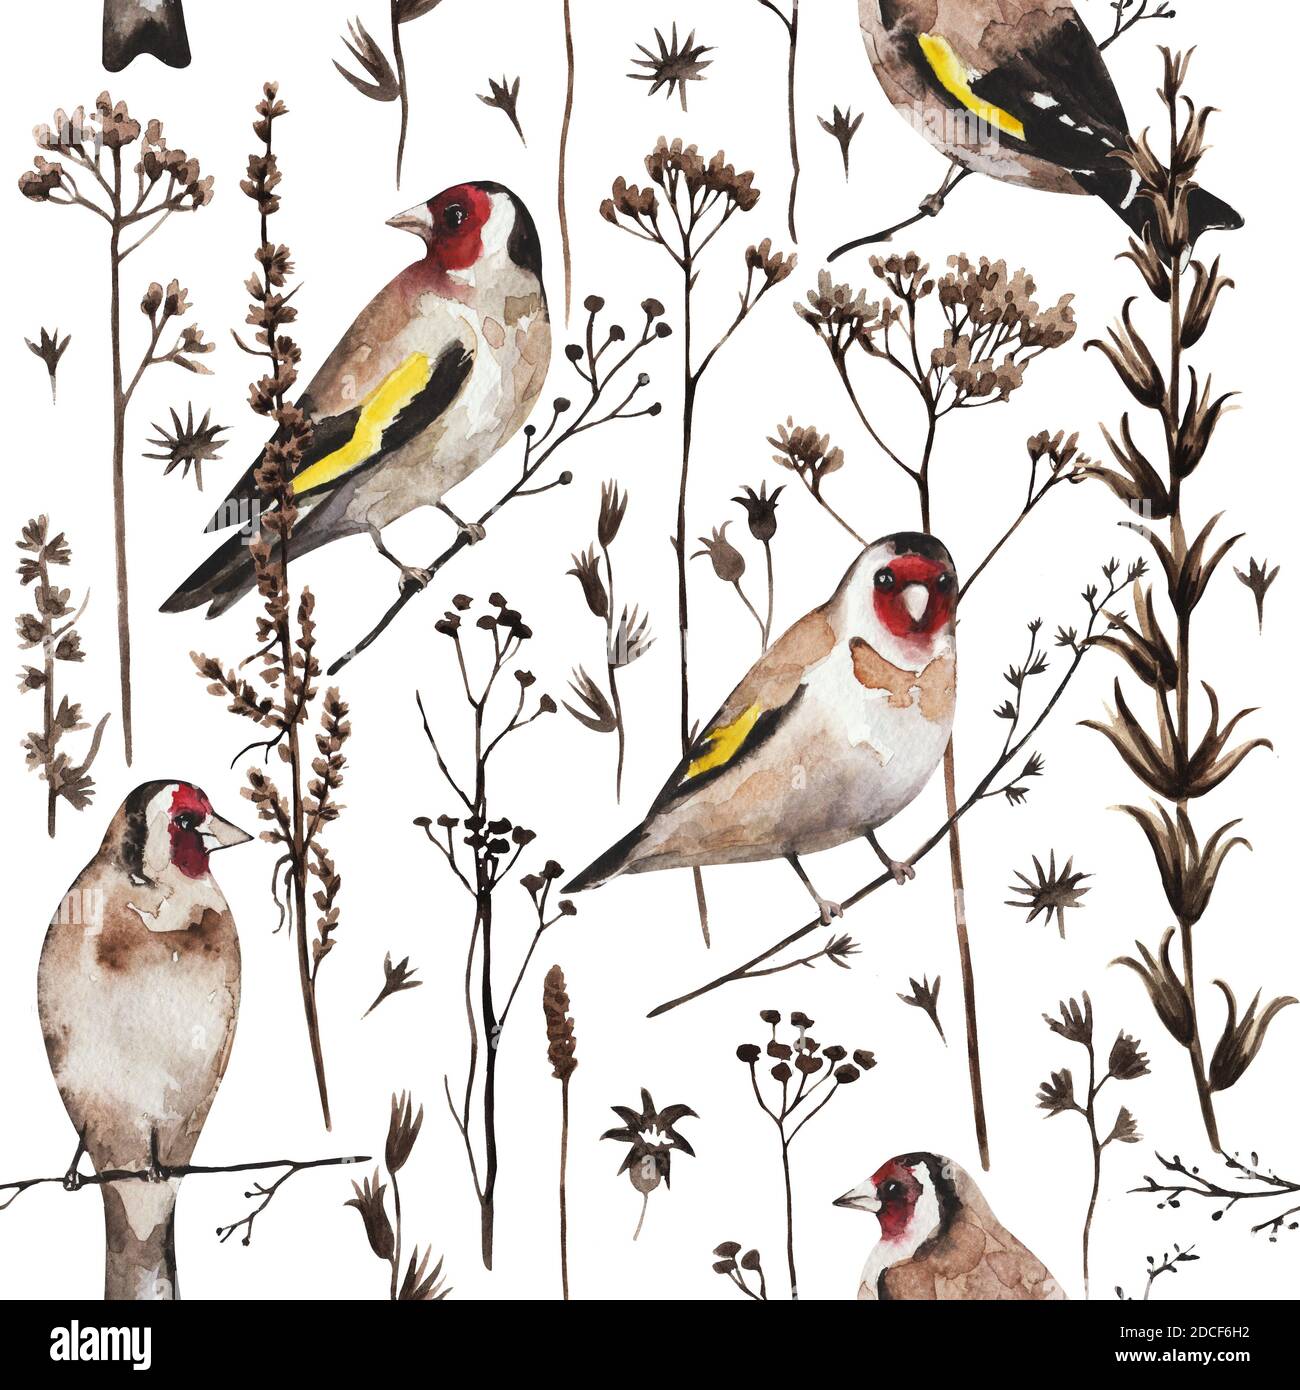 Seamless vintage pattern with goldfinch birds and autumn dry plants and flowers. Watercolor painting Stock Photo